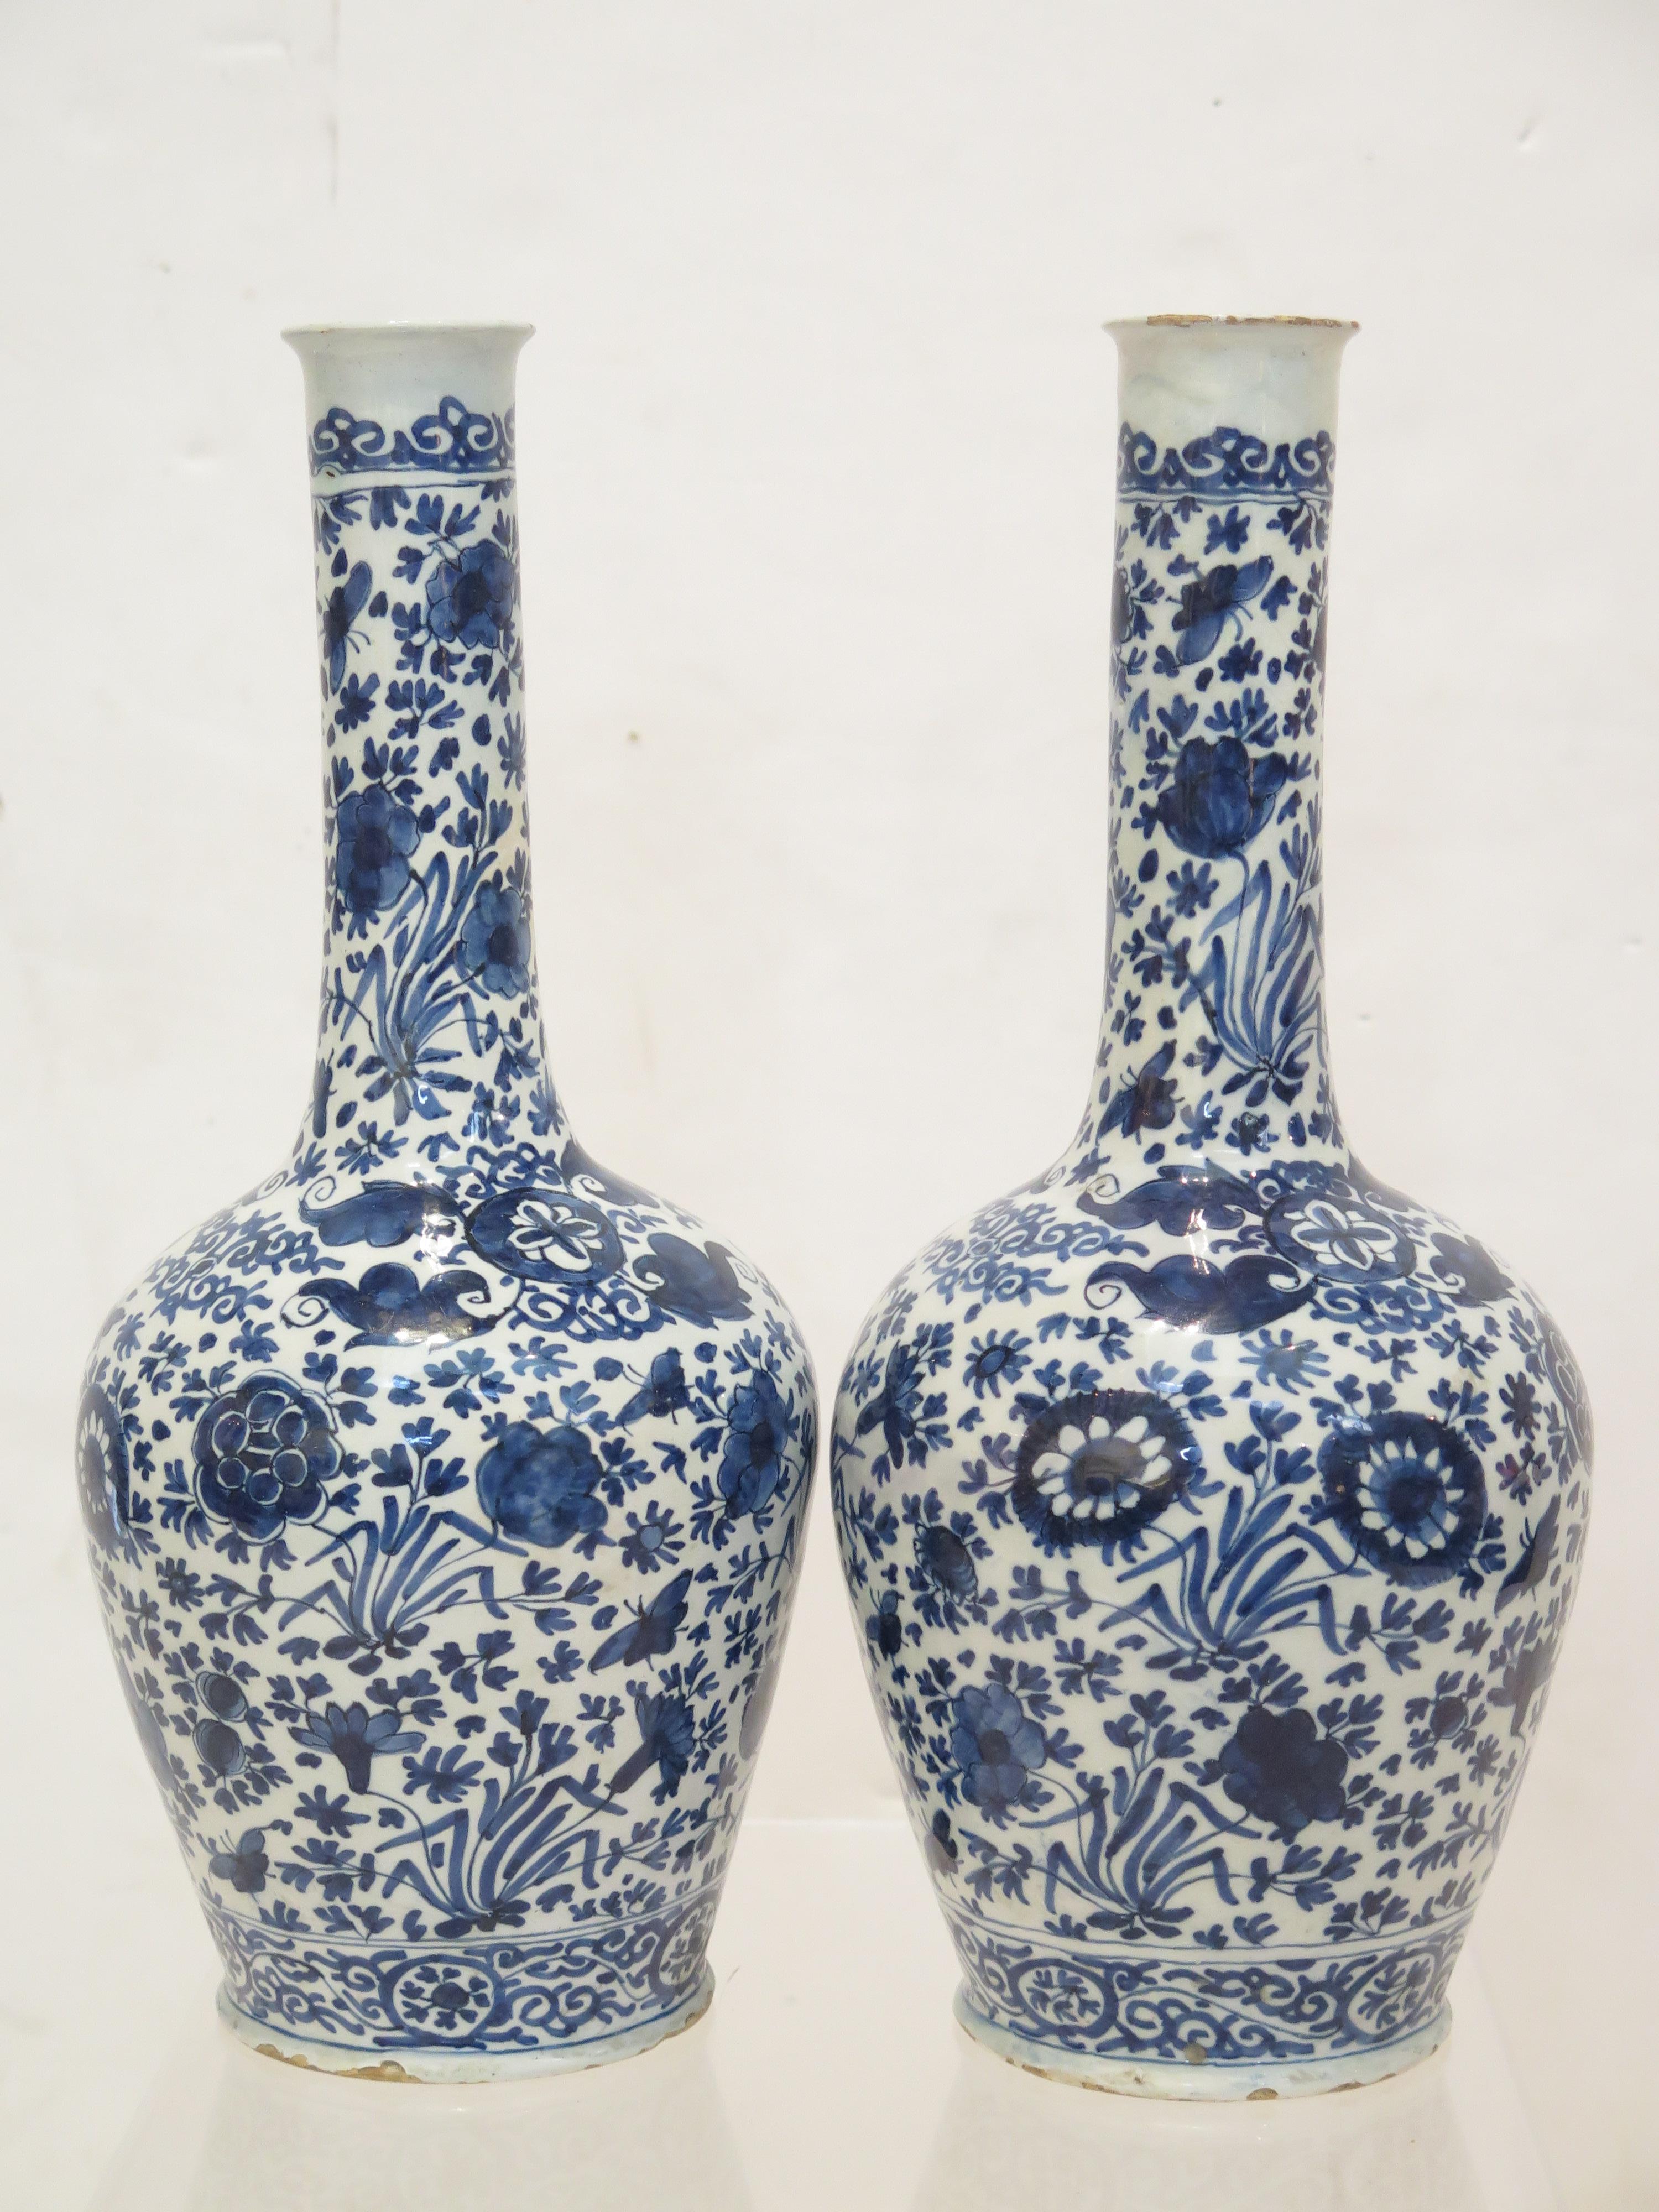 A pair of Dutch Delft blue and white bottle vases decorated in cobalt blue with  bands of scrolling, butterflies, leaves and flowers. 19th Century.

                                                    14